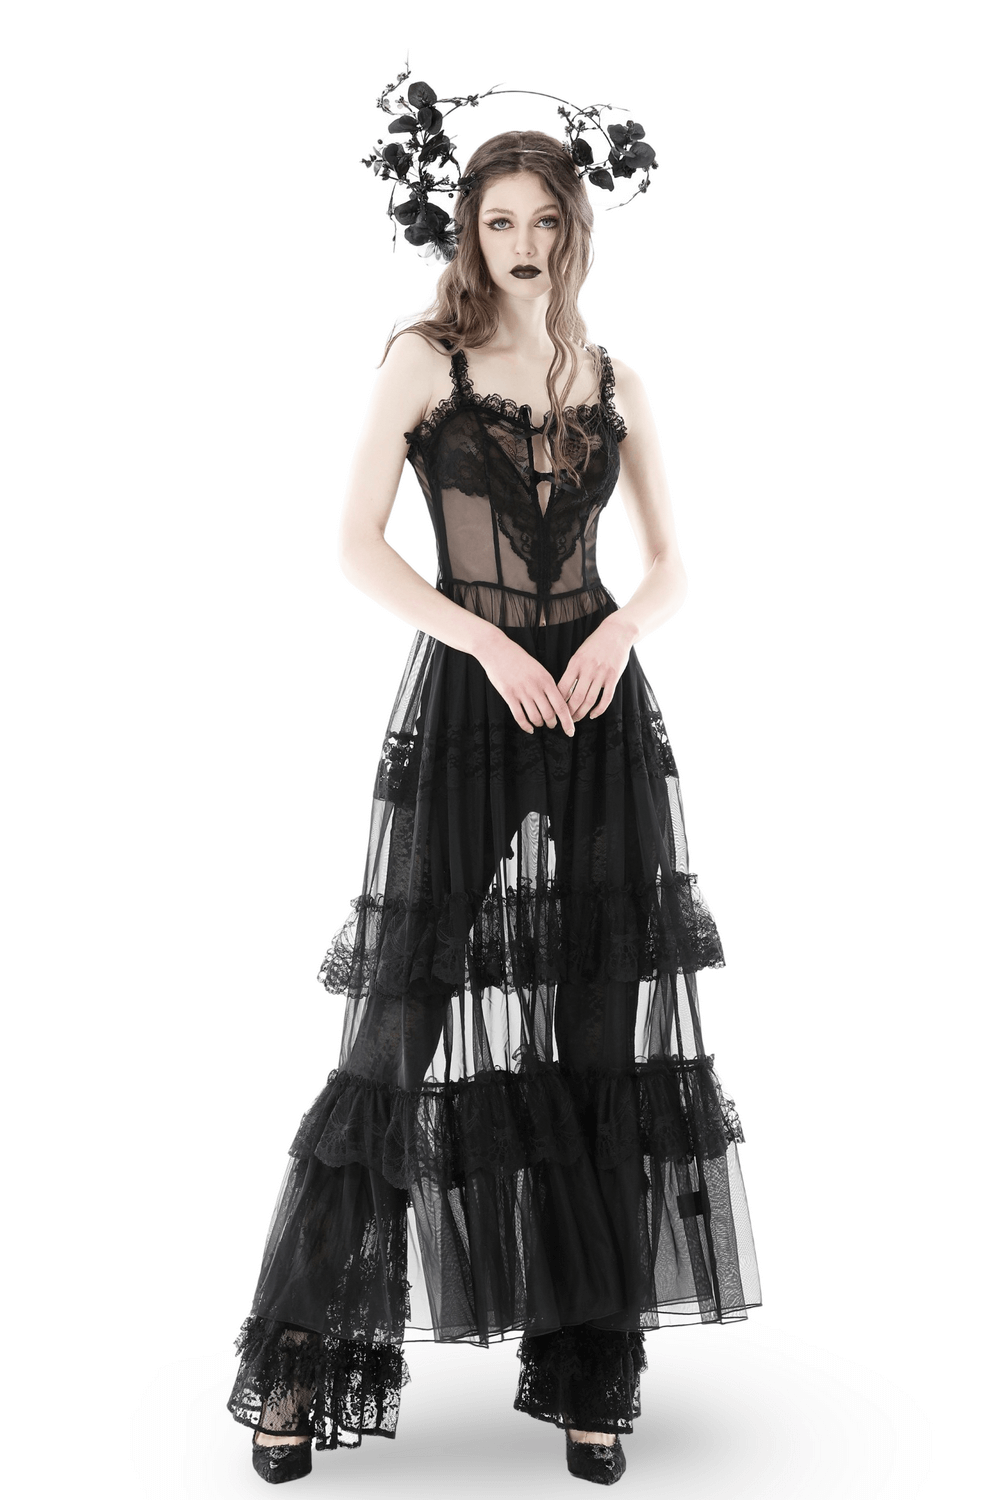 Victorian-Inspired Lace Dress - Dark and Romantic